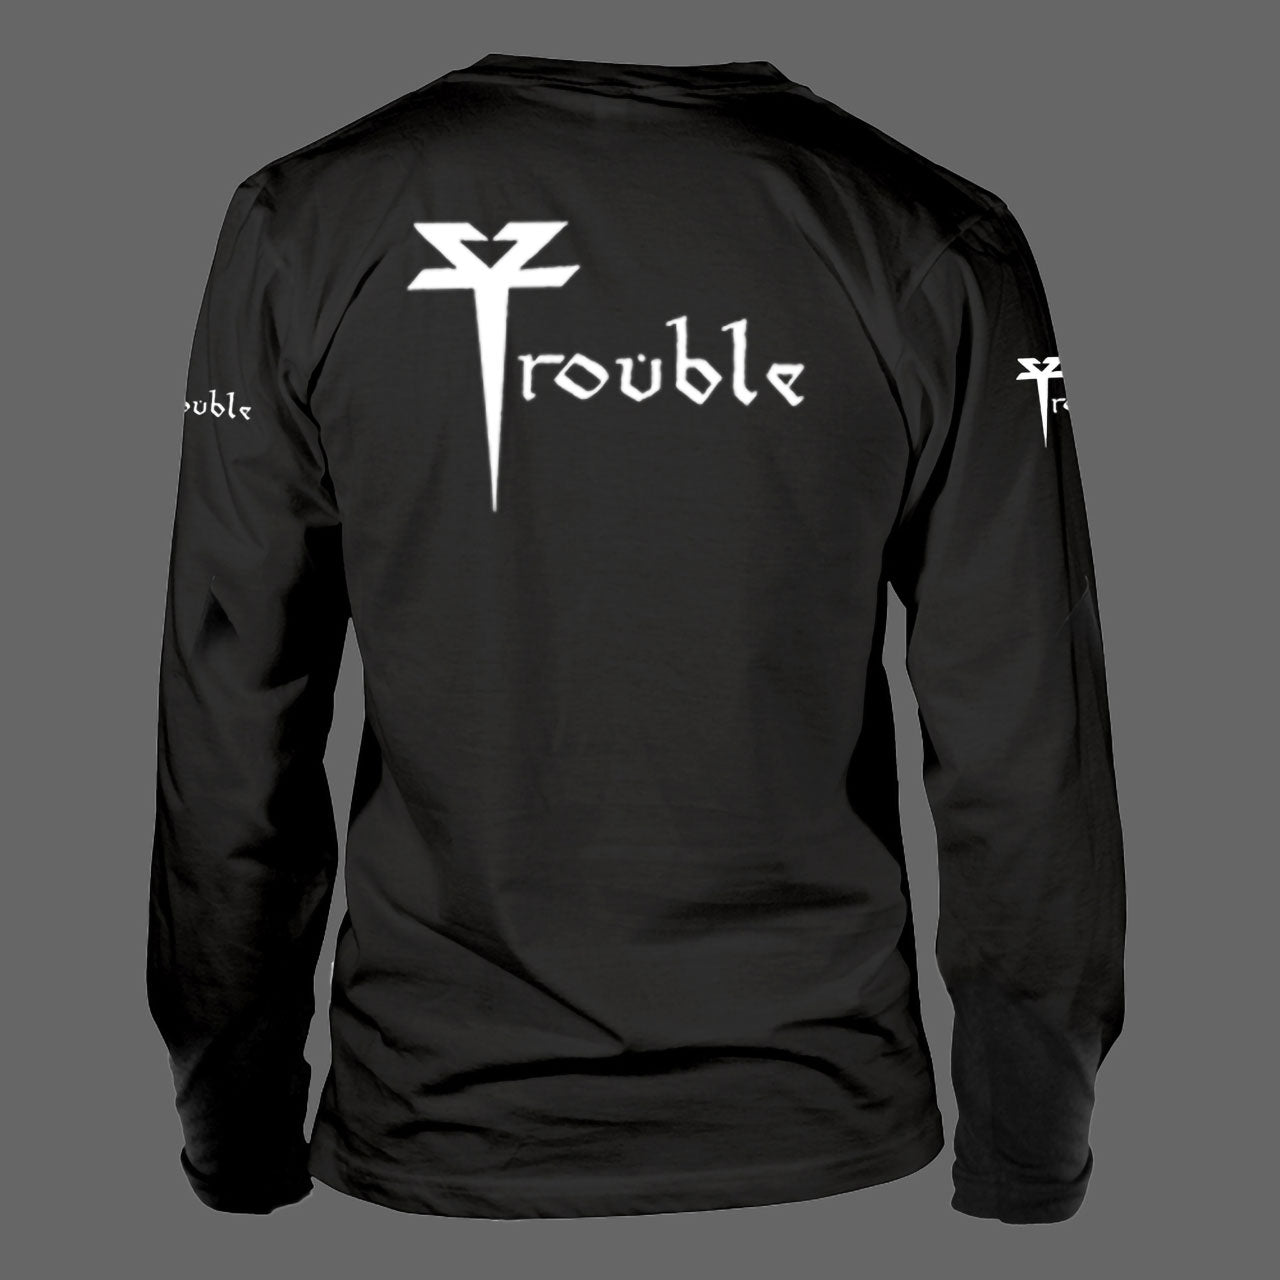 Trouble - The Skull (Long Sleeve T-Shirt)